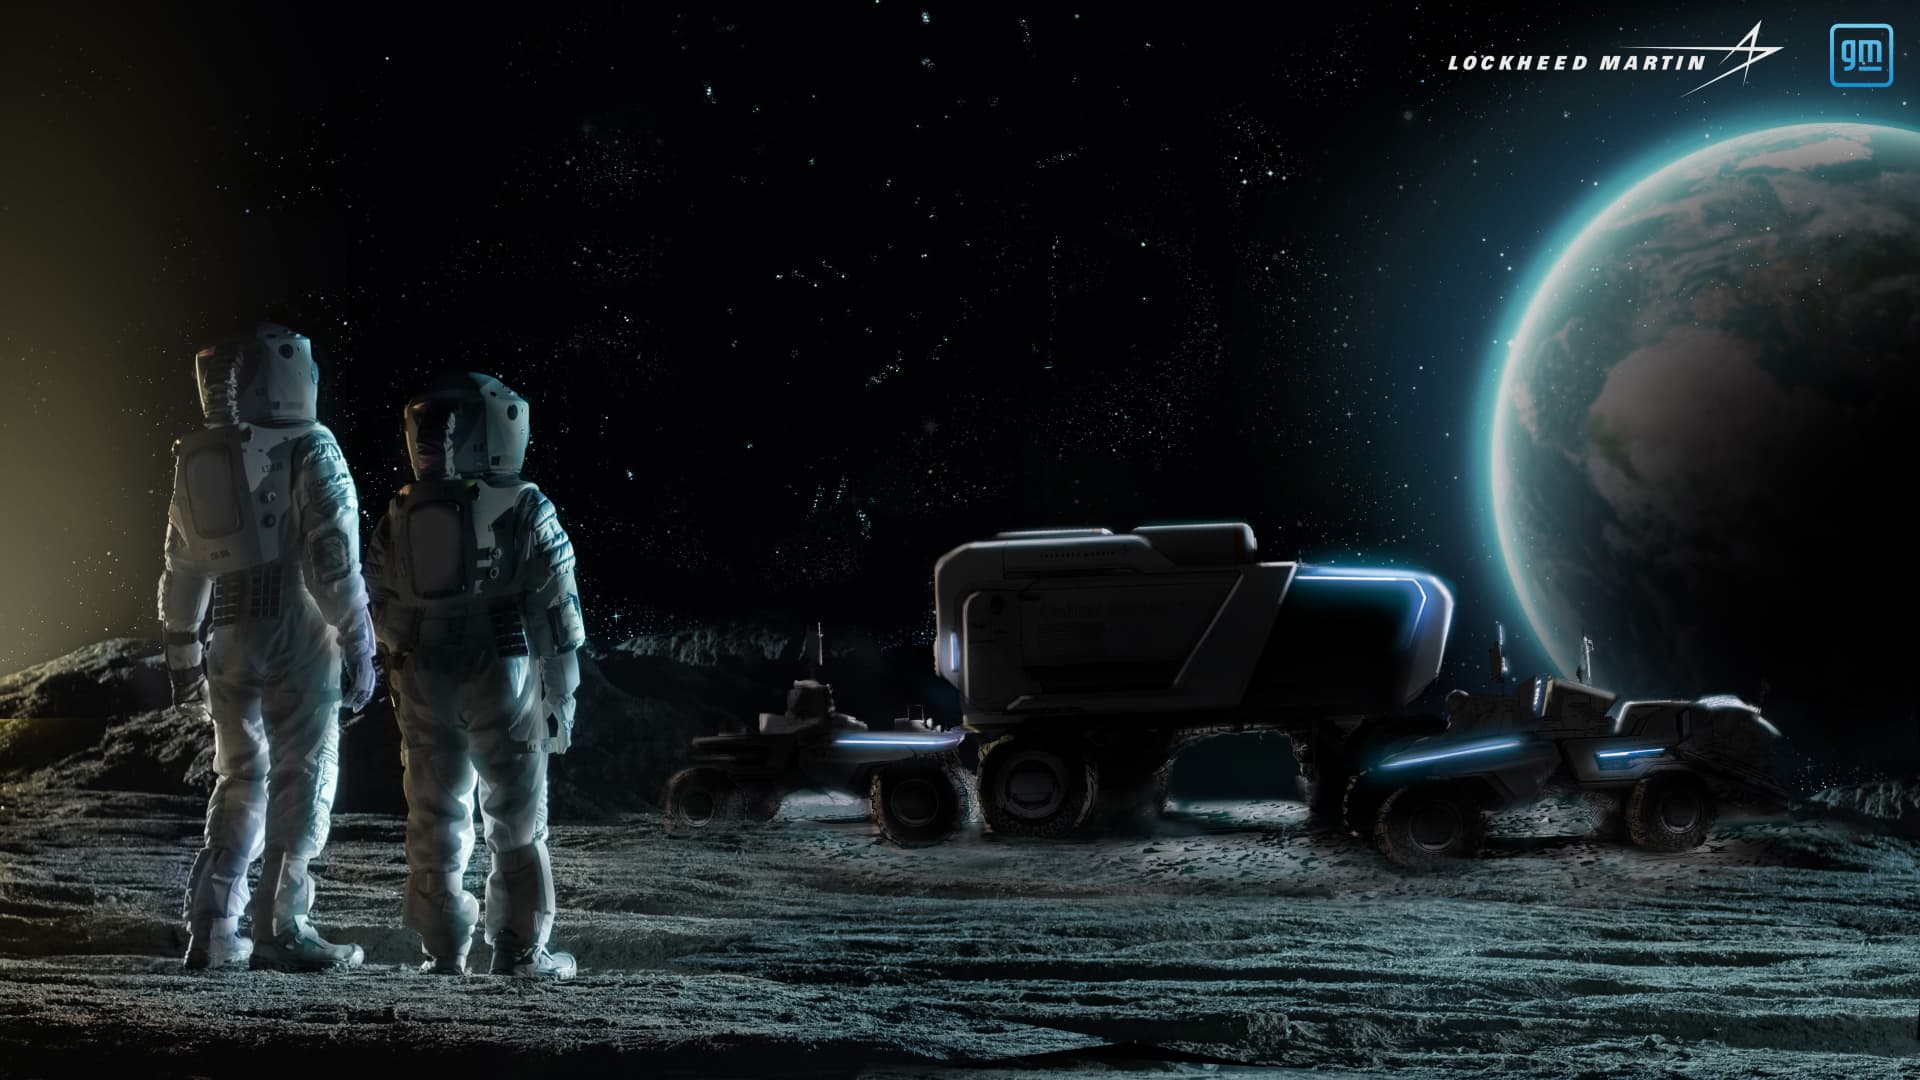 GM, Lockheed take lunar rover project to the commercial space market